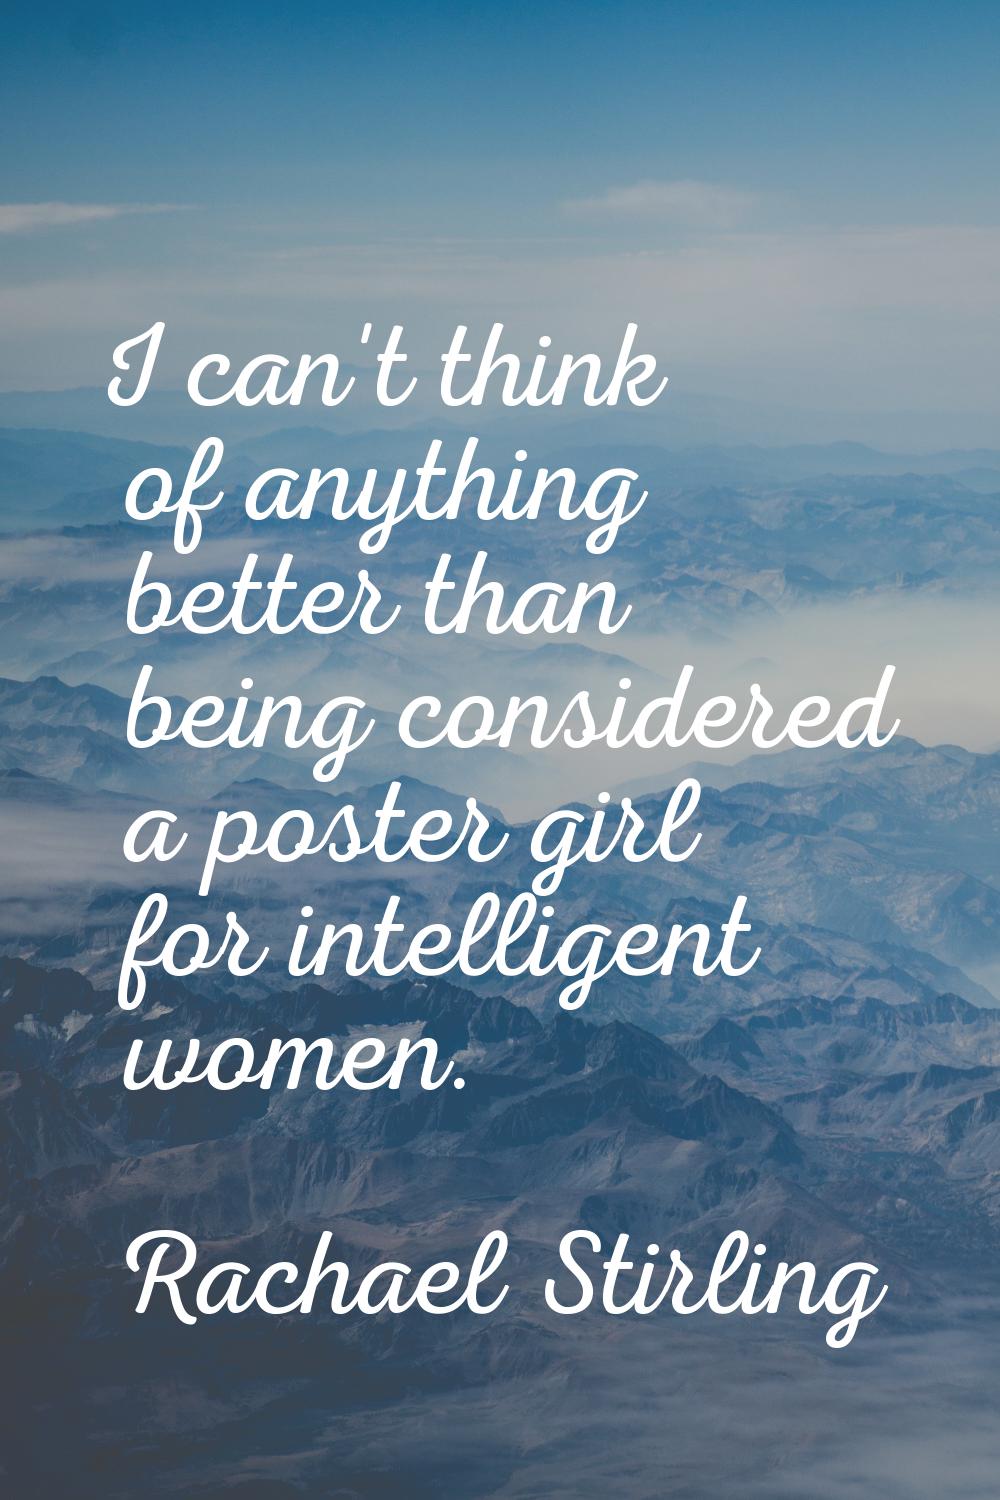 I can't think of anything better than being considered a poster girl for intelligent women.